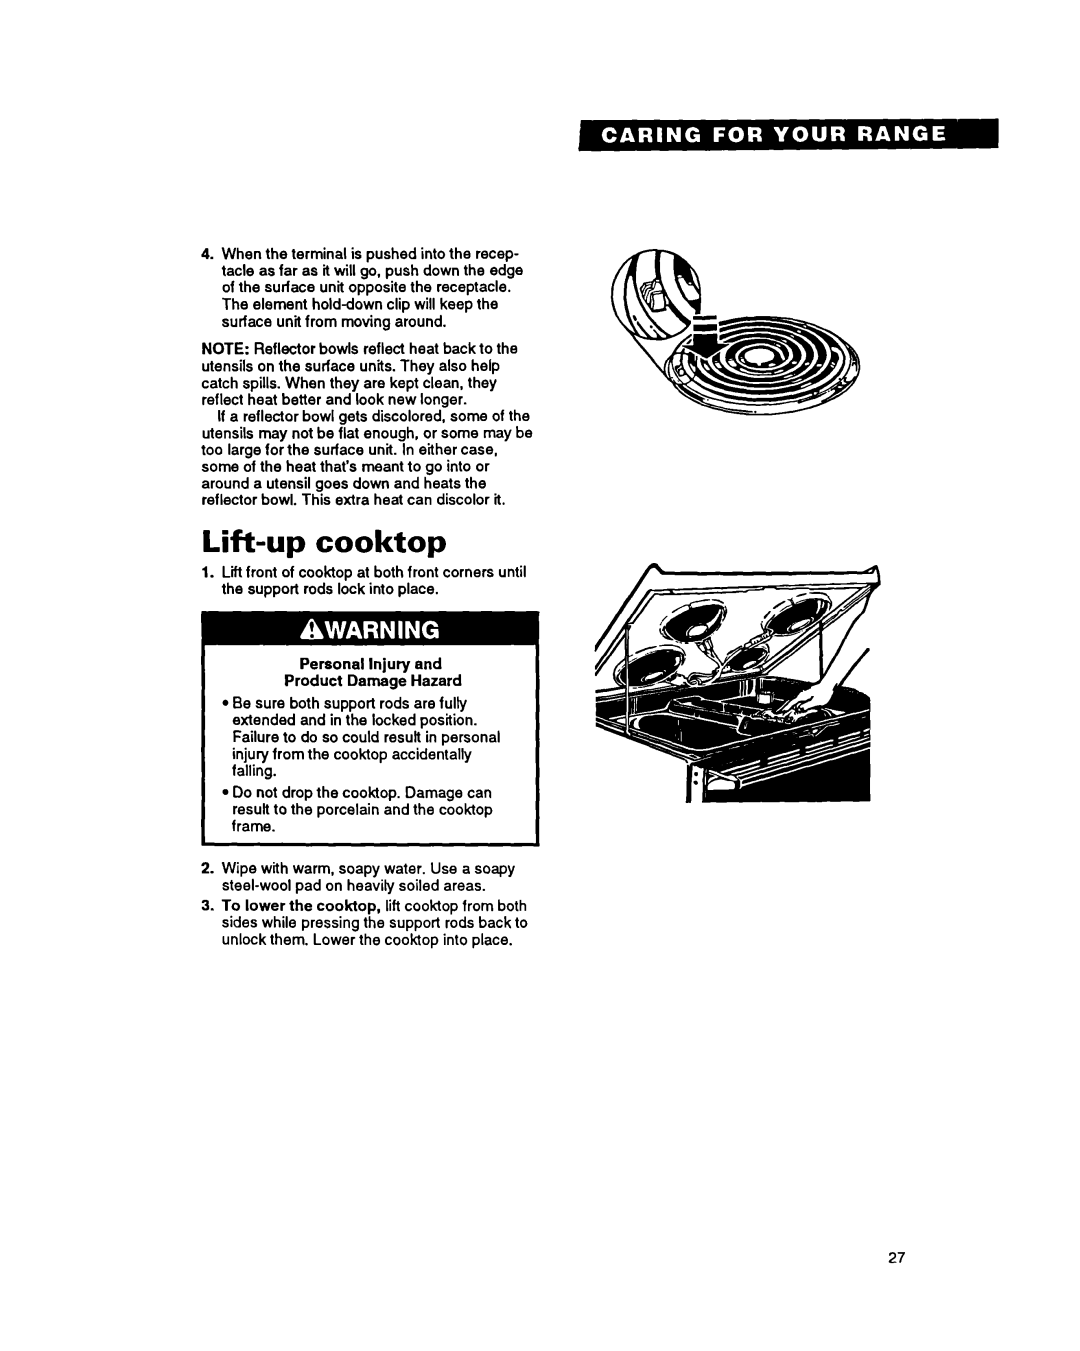 Whirlpool FES340Y important safety instructions Lift-upcooktop 